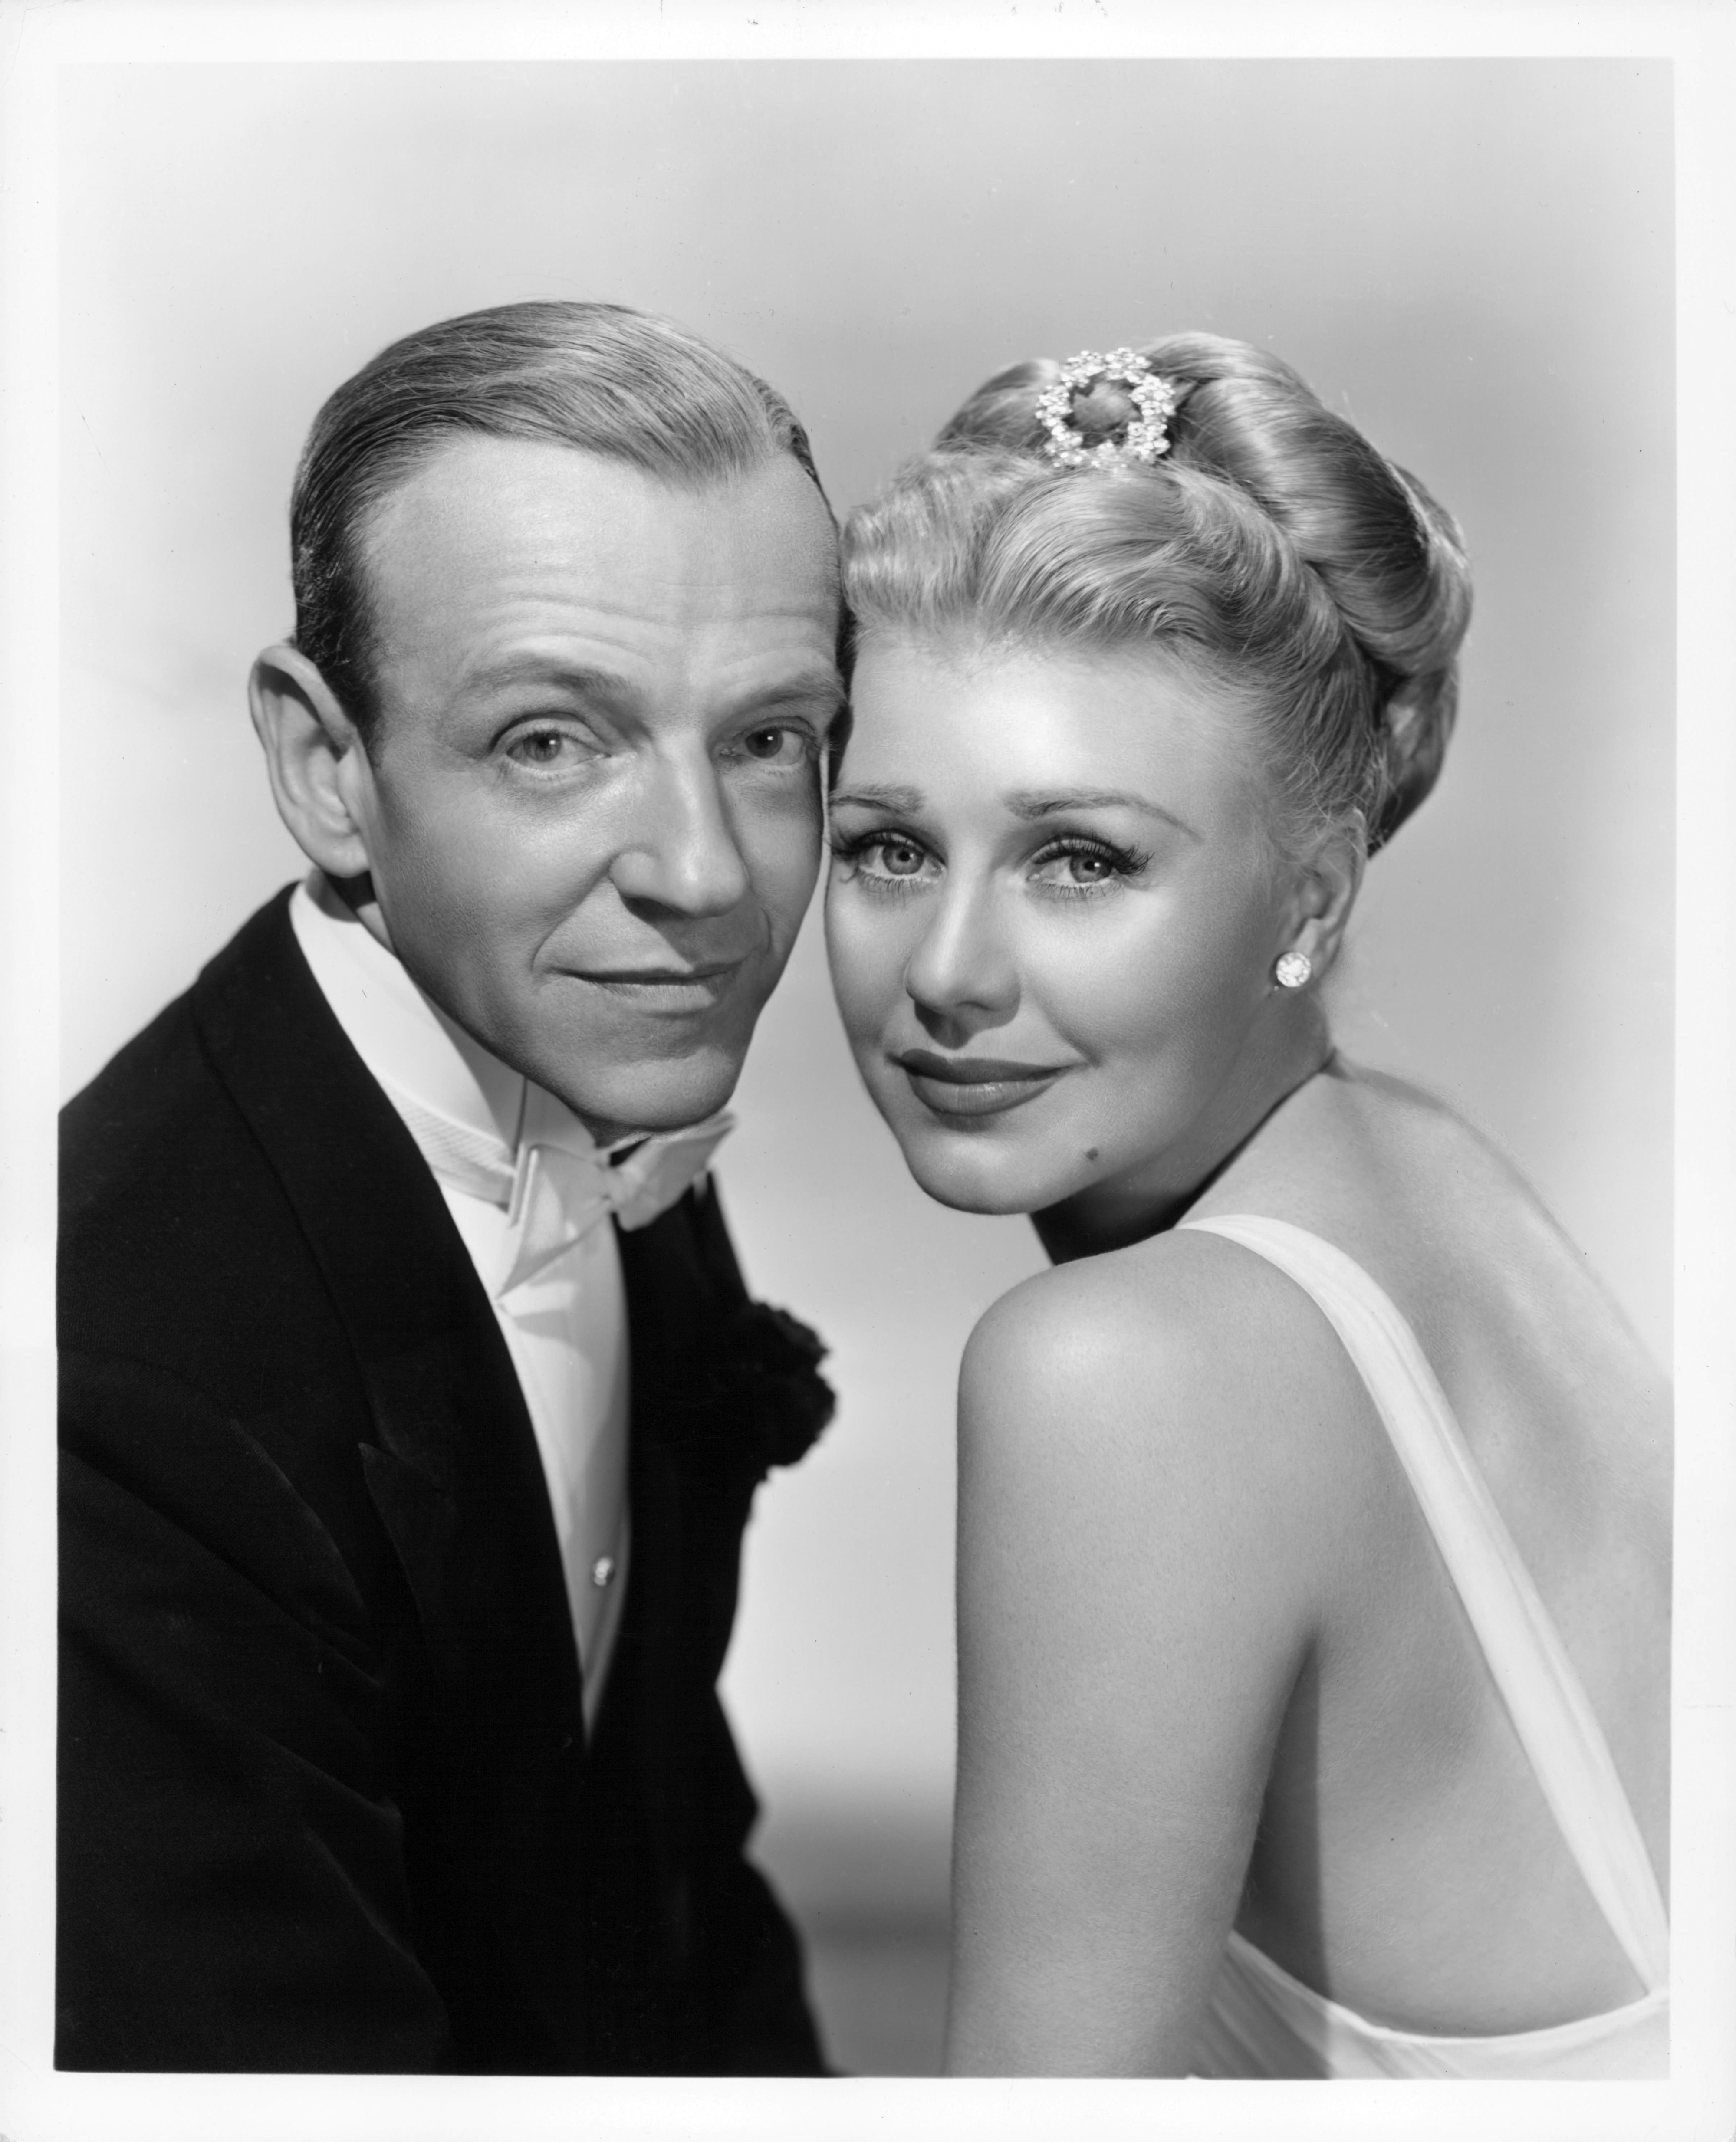 Two classic film stars smiling closely, man in tuxedo, woman with elegant hairdo